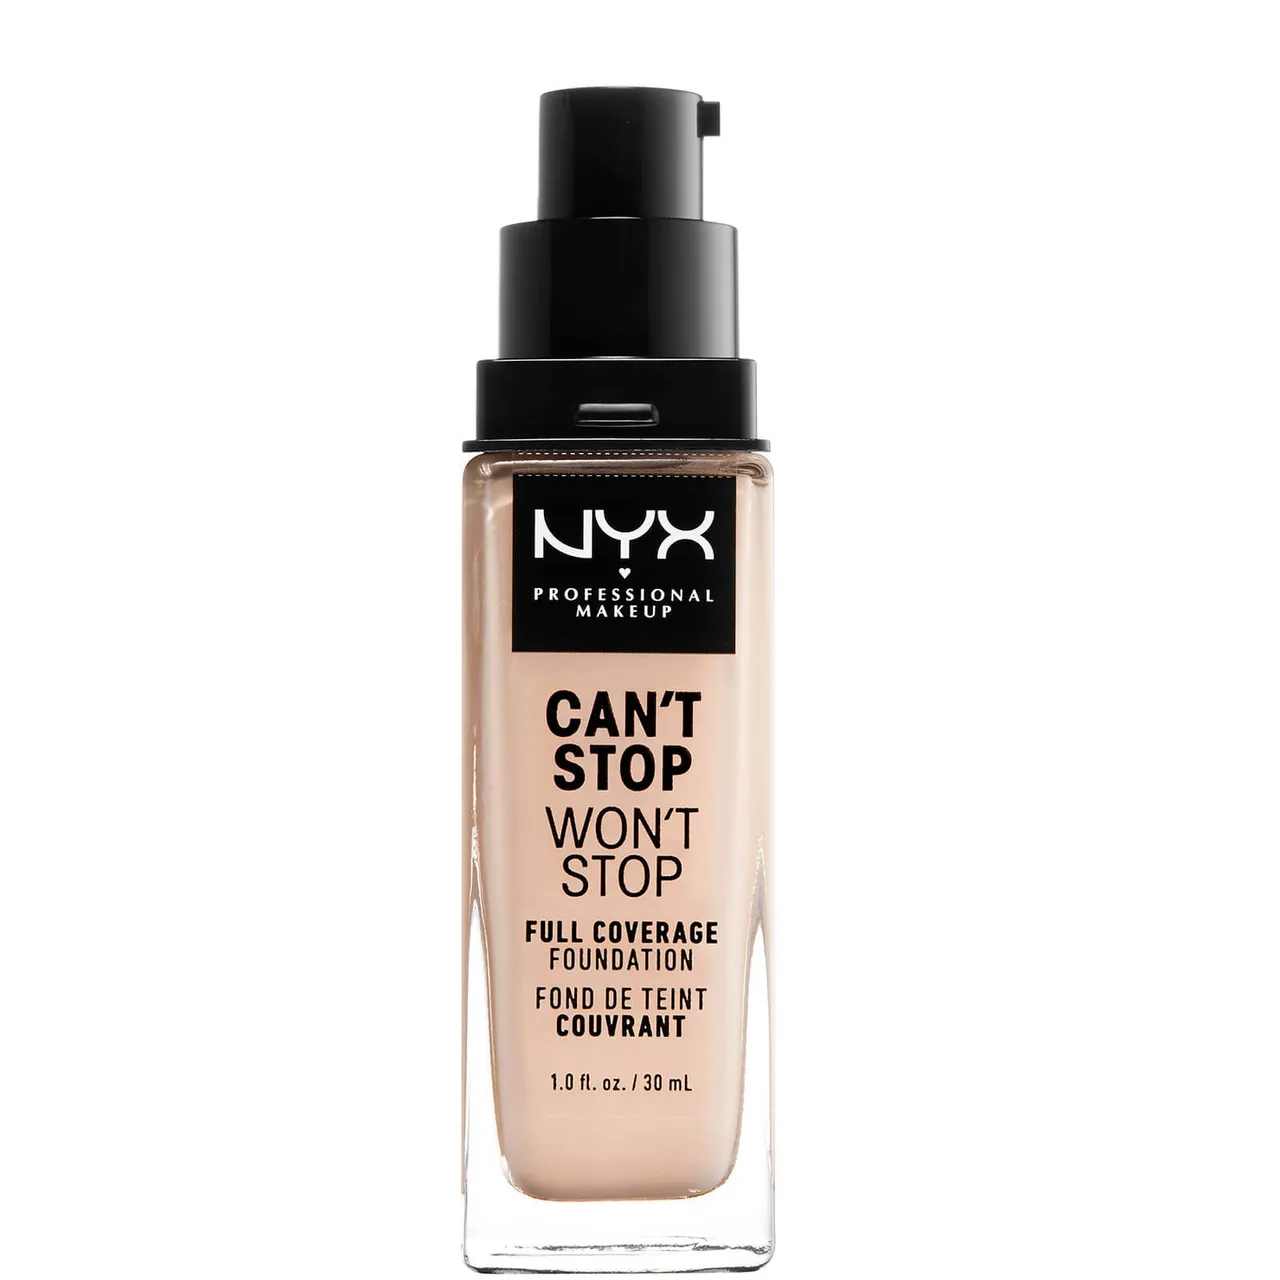 NYX Professional Makeup Can't Stop Won't Stop 24 Hour Foundation (Various Shades) - Light Porcelain